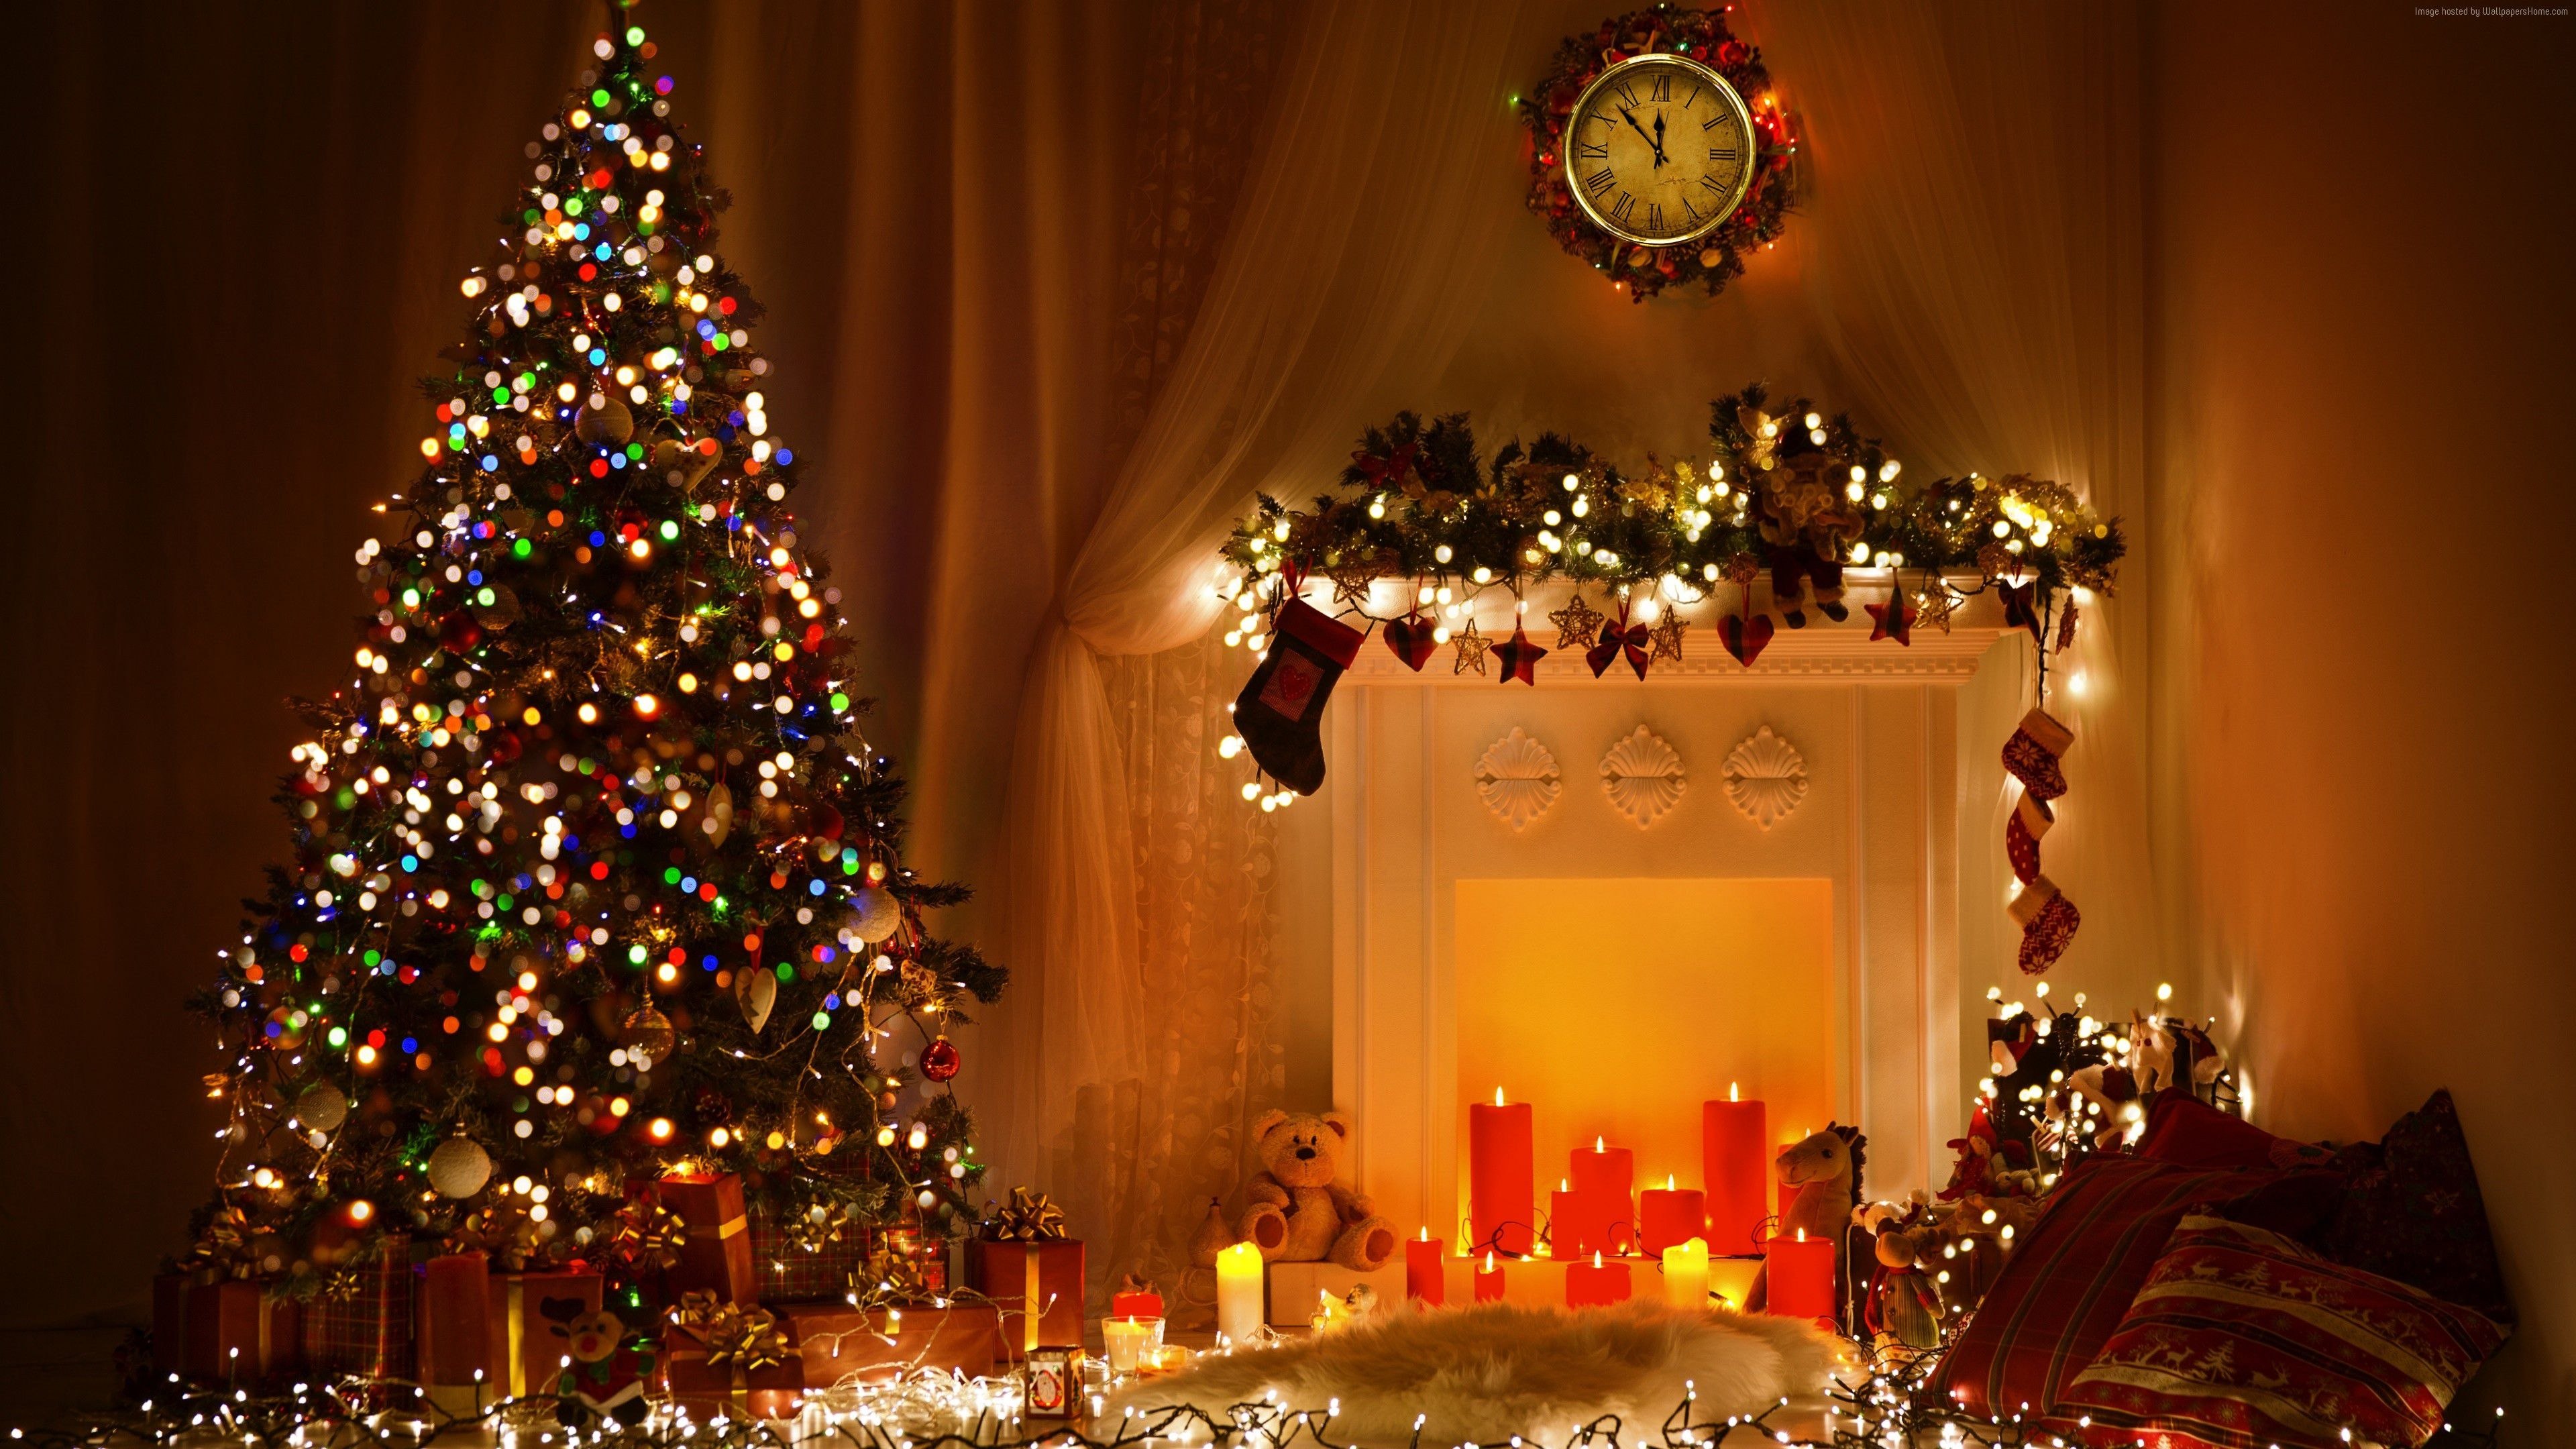 4k Fireplace High Definition Wallpaper - Christmas Wallpapers For Pc - HD Wallpaper 